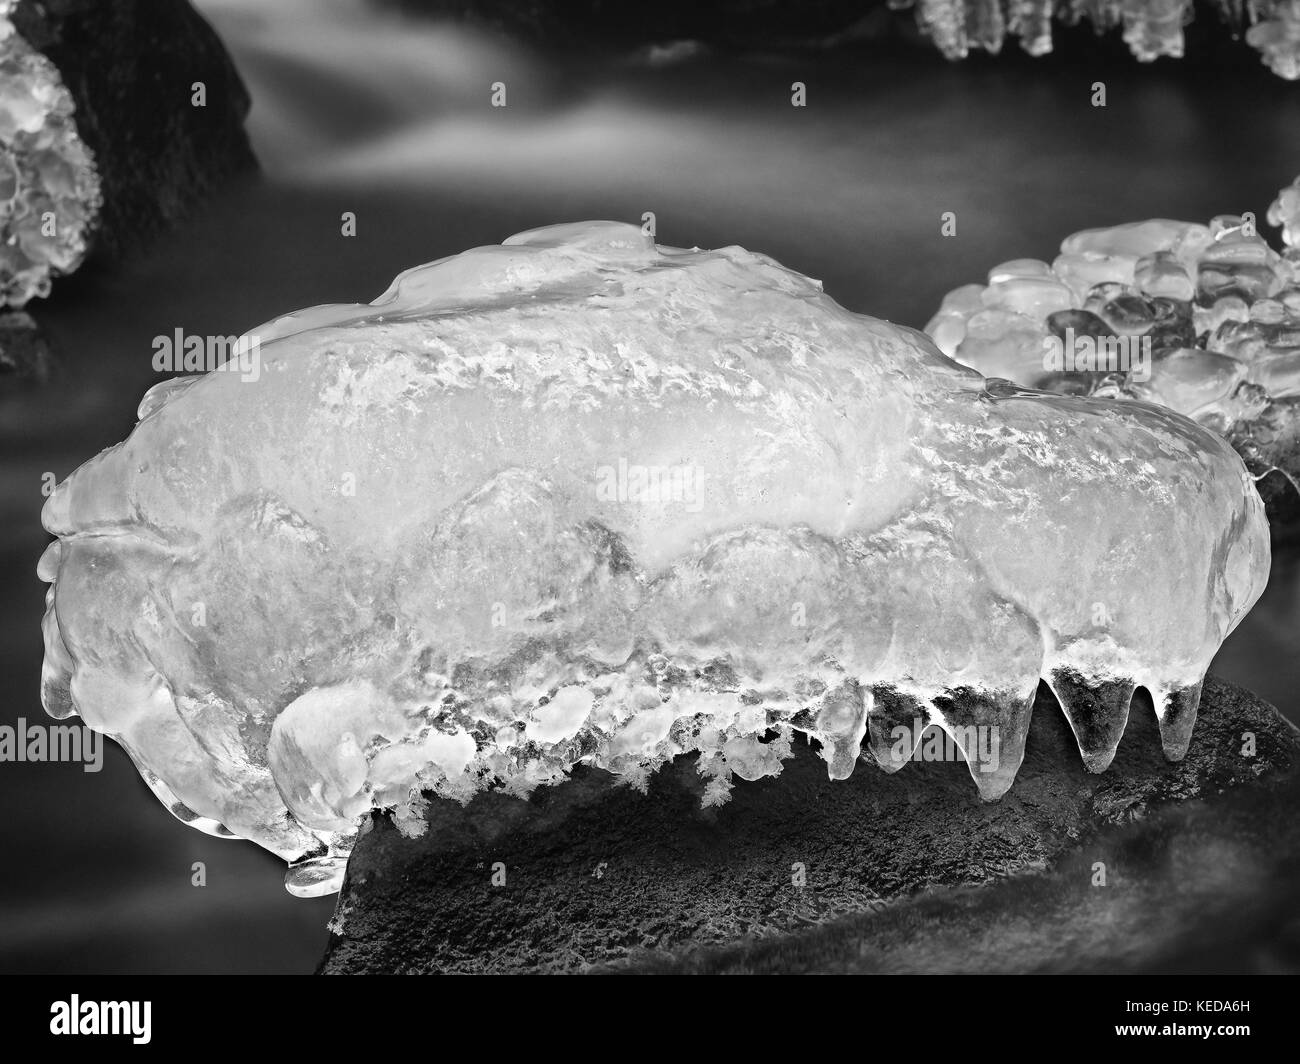 Piece of rystal ice with cracks inside. Fallen icicle bellow waterfall, stony and messy stream bank. Extreeme freeze Stock Photo